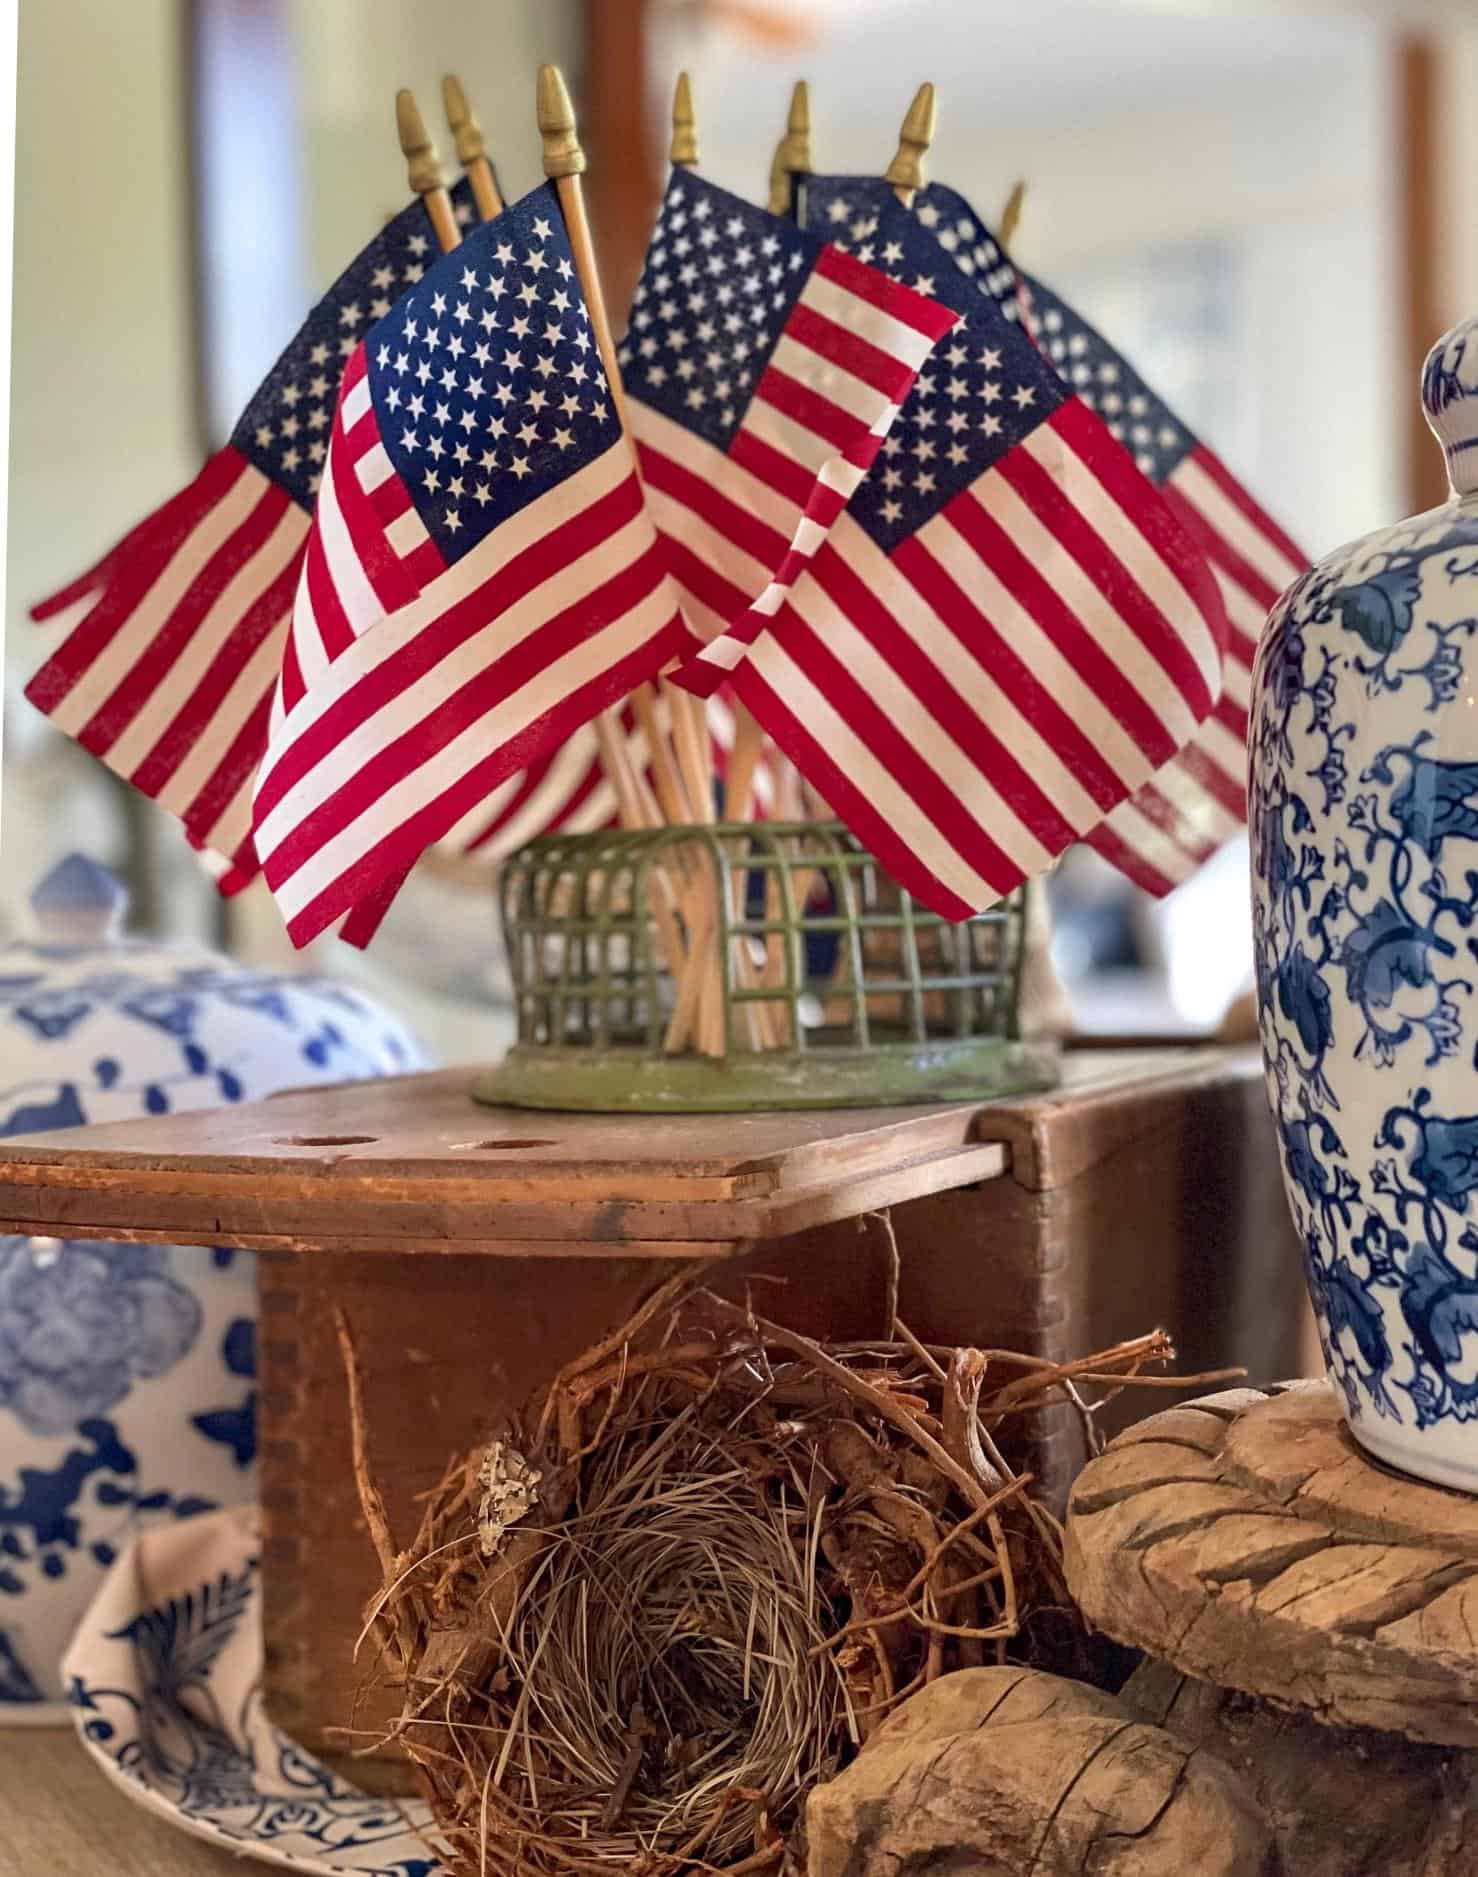 Using a floral frog to display mini American flags